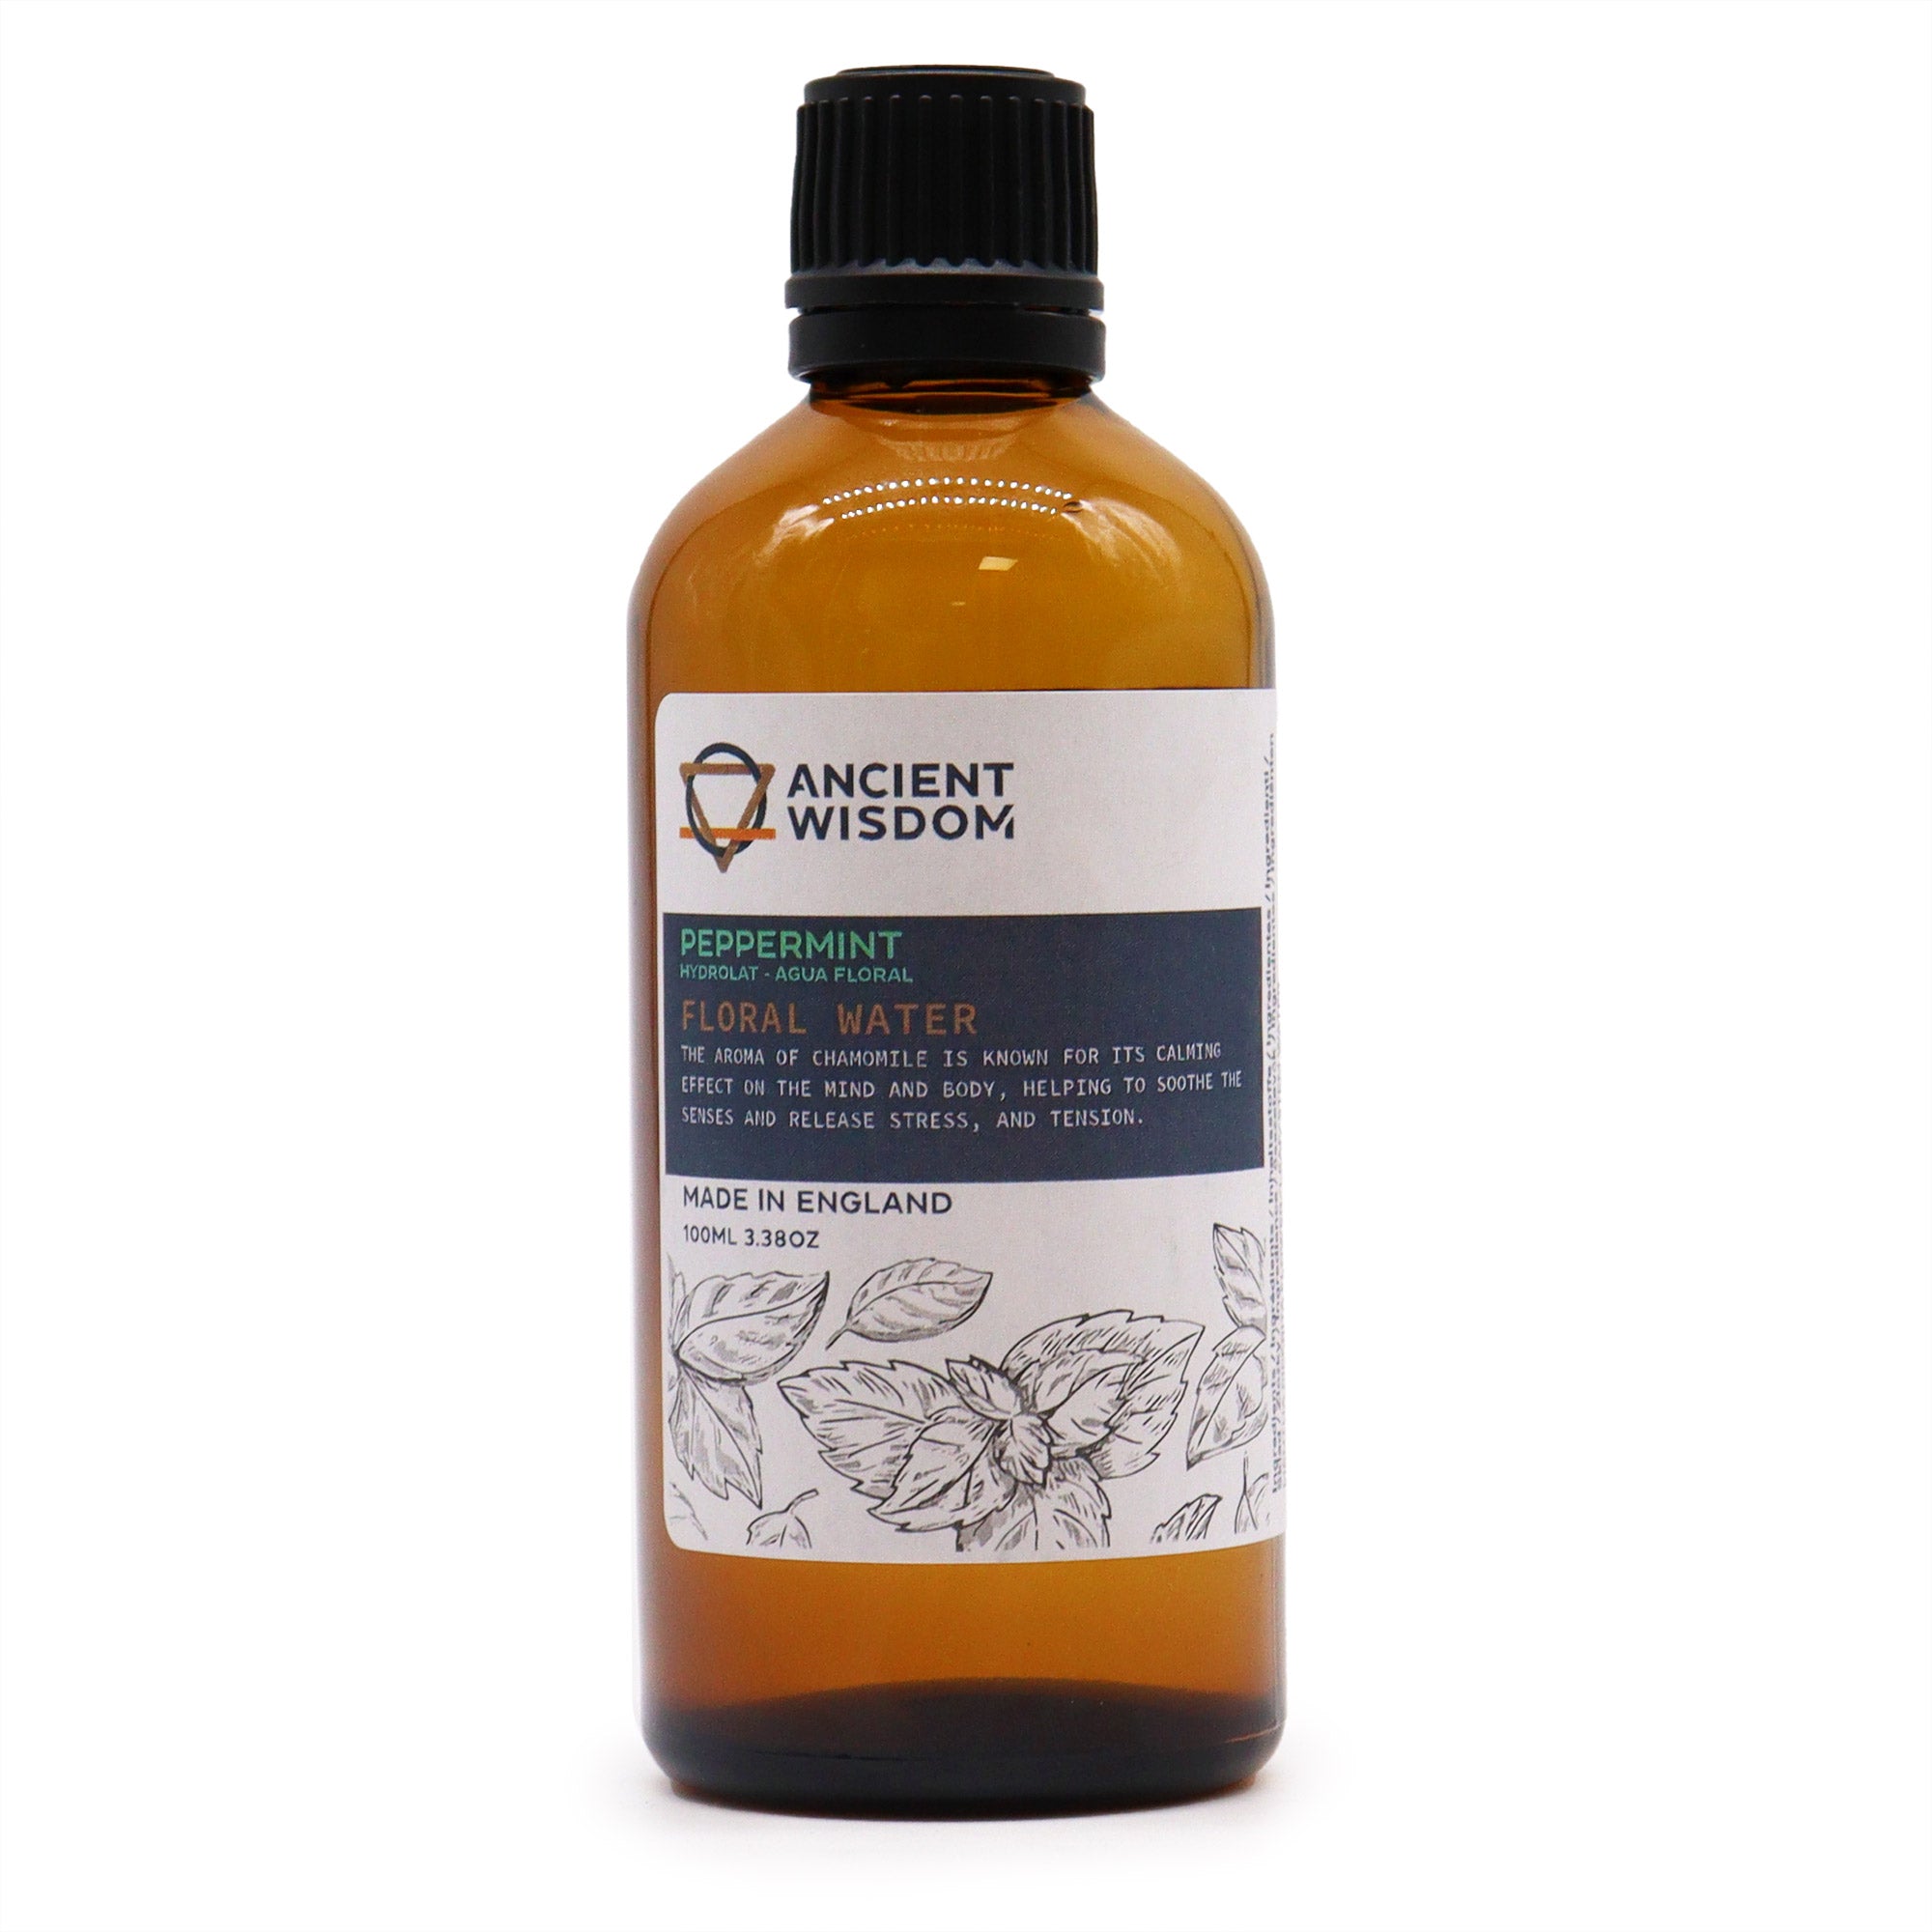 View Peppermint Hydrolat 100ml information